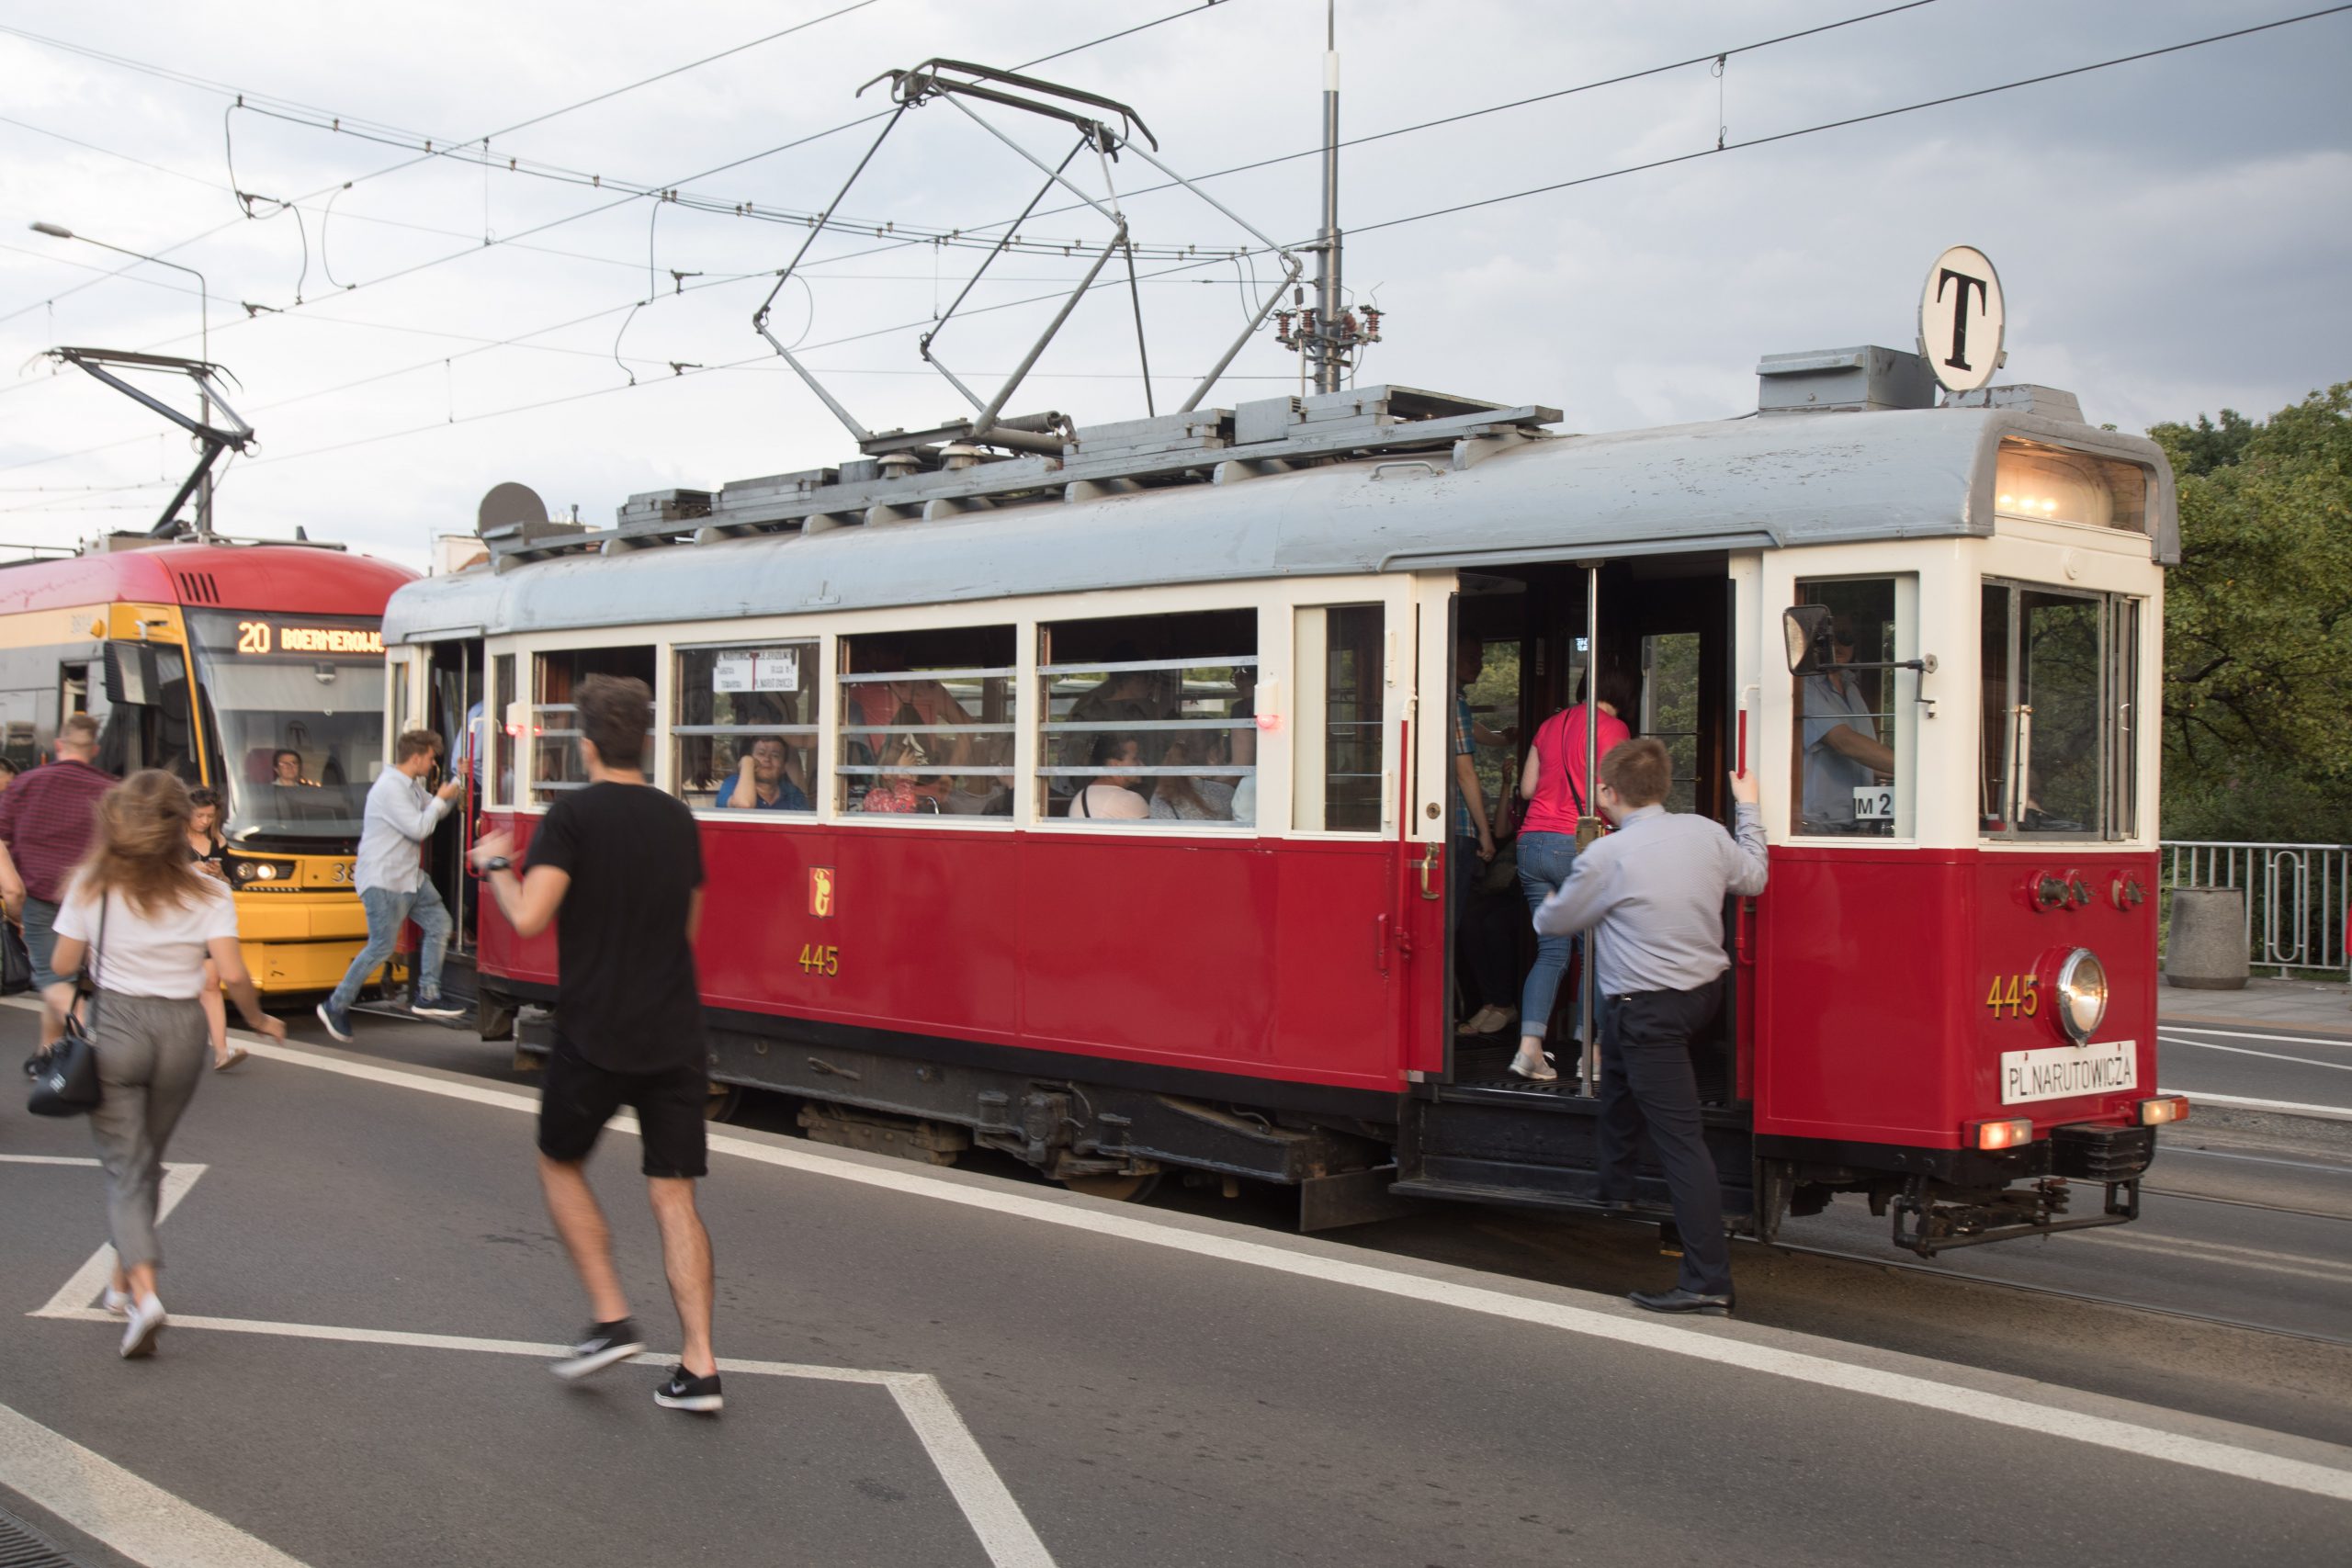 You can travel with both these old school trams or a bit more modern ones.